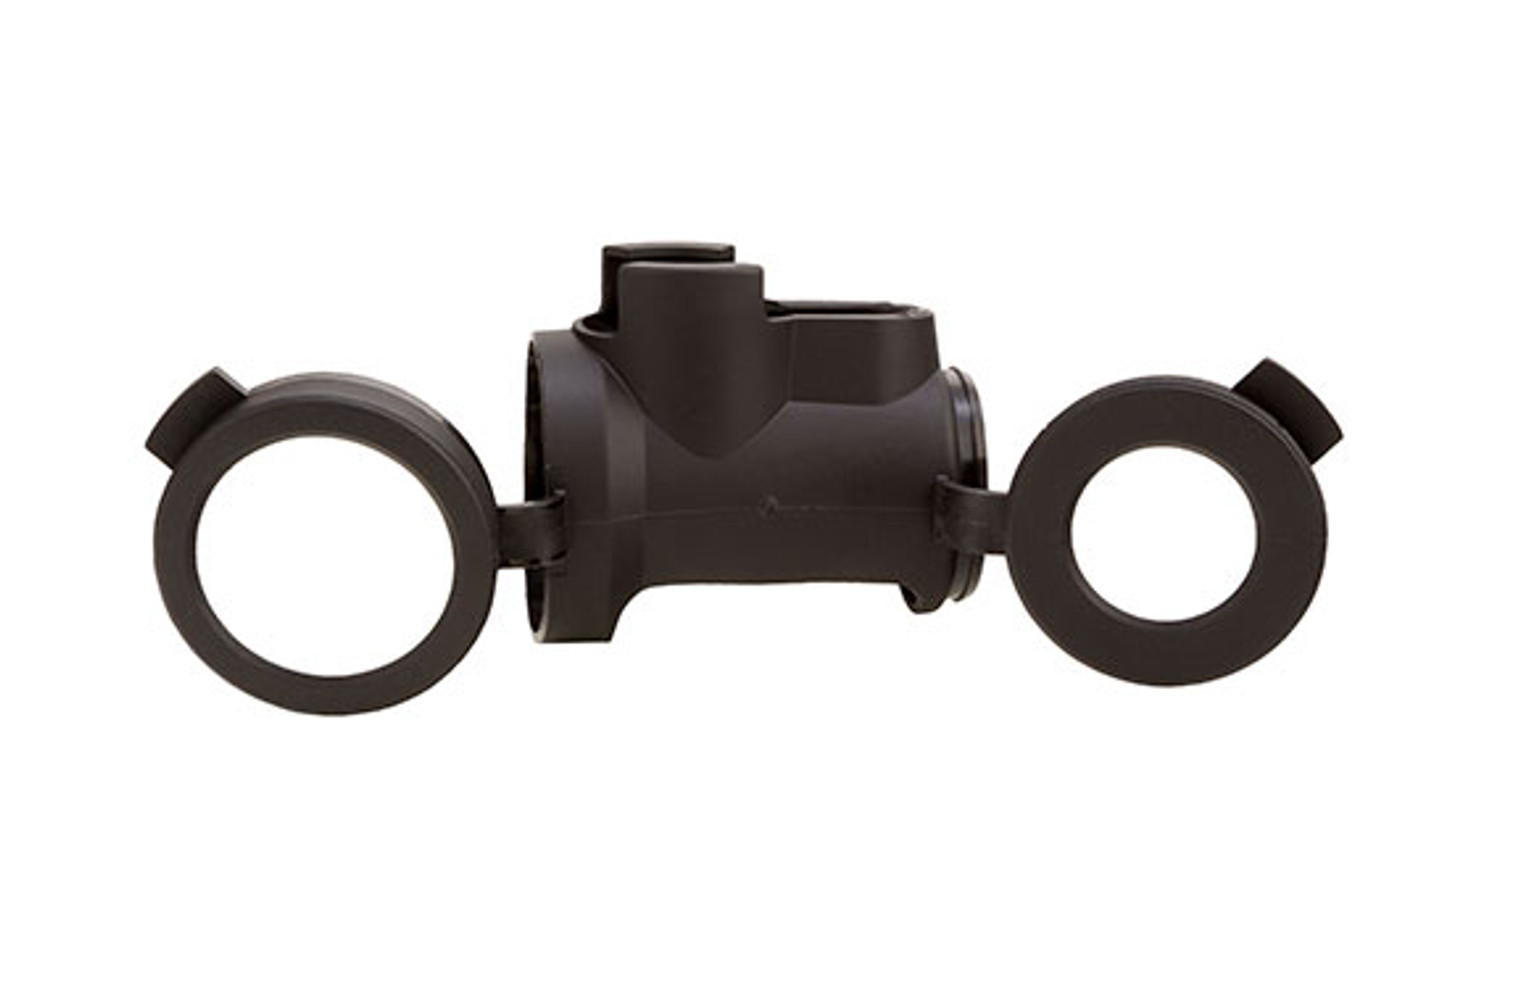 Trijicon MRO Slip on Cover in Black with Clear Lens Caps